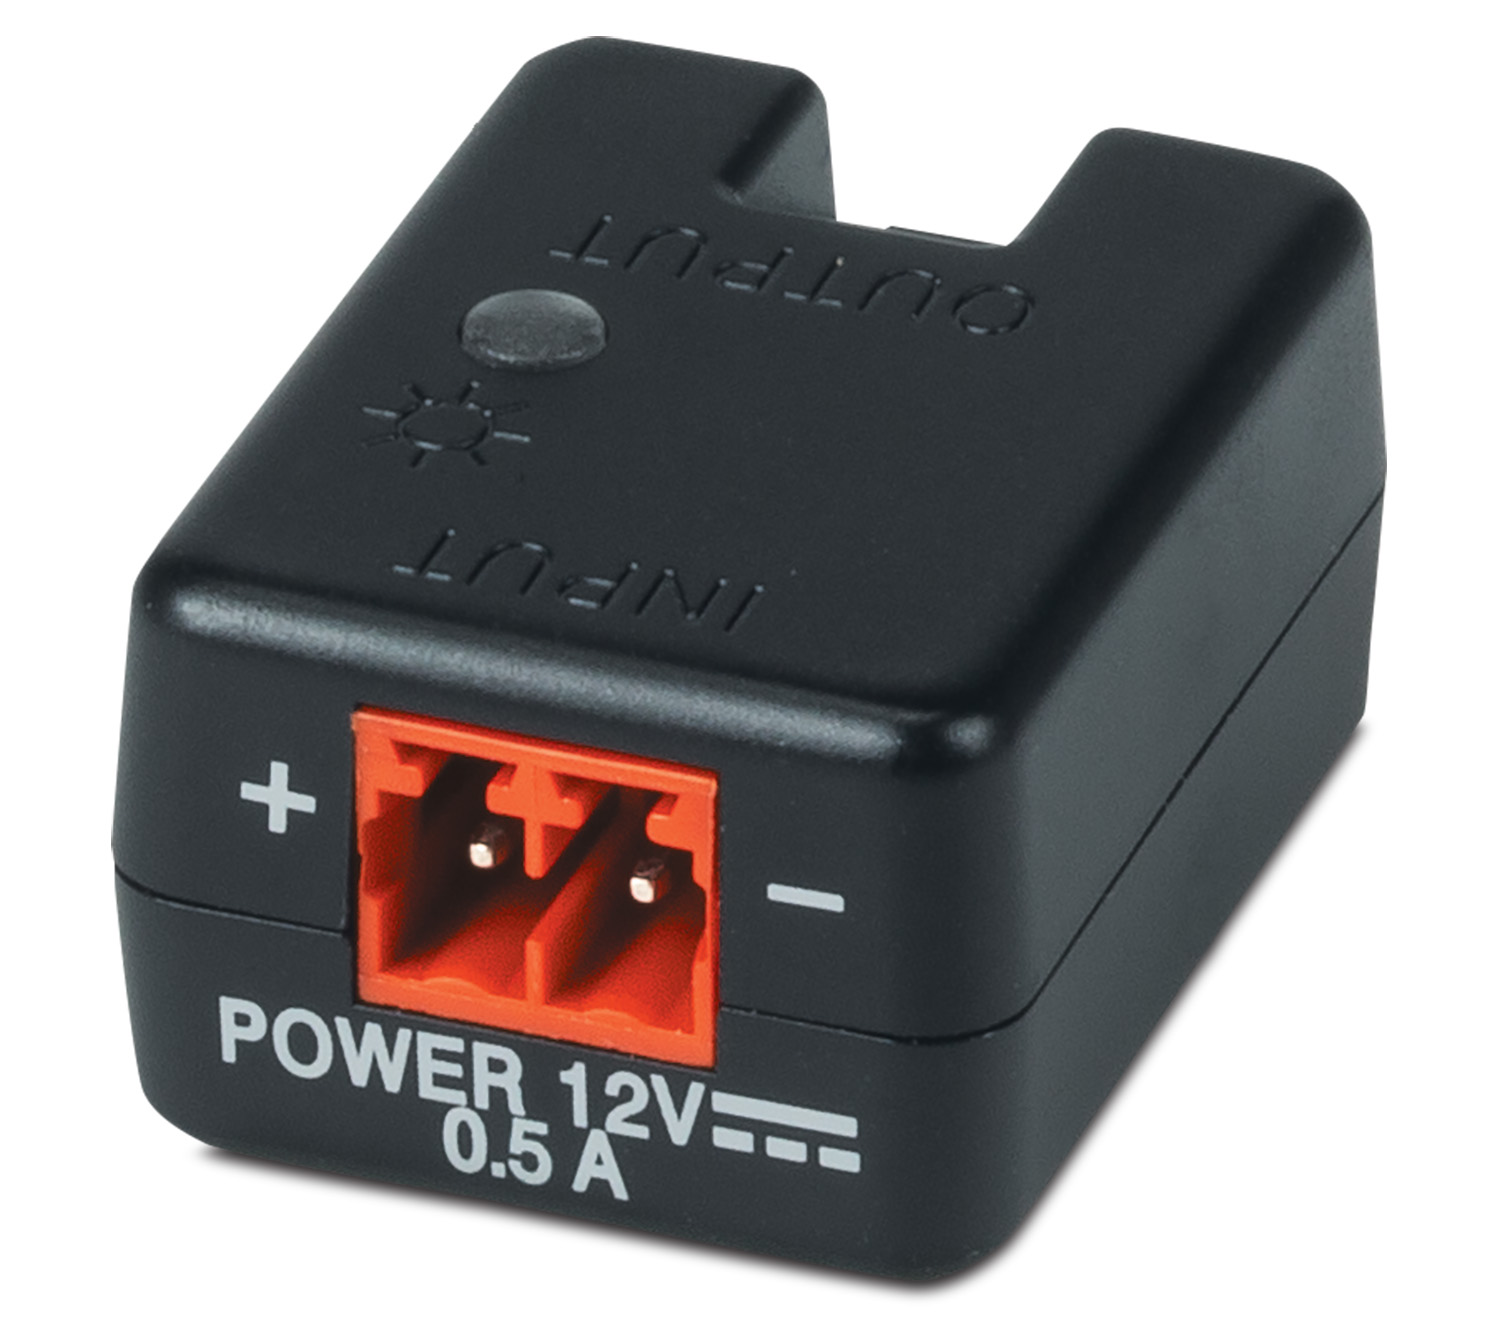 CPI 51 power injector draws power from an external 12V power source